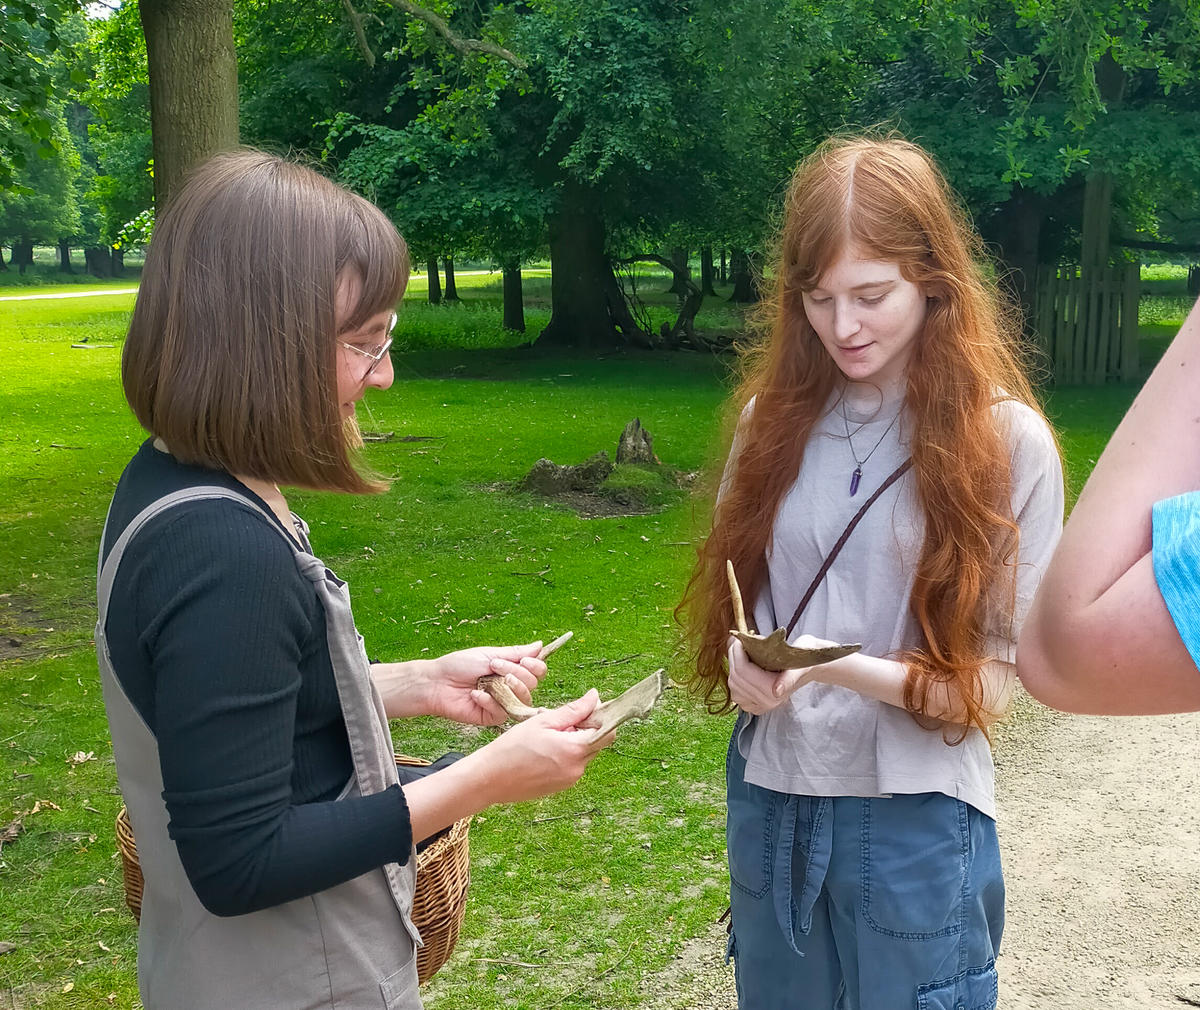 Young girl holding deer antlers. She is looking down smiling. Next to her is a staff member from Dunham Massey park explaining. They are stood outside in the park.